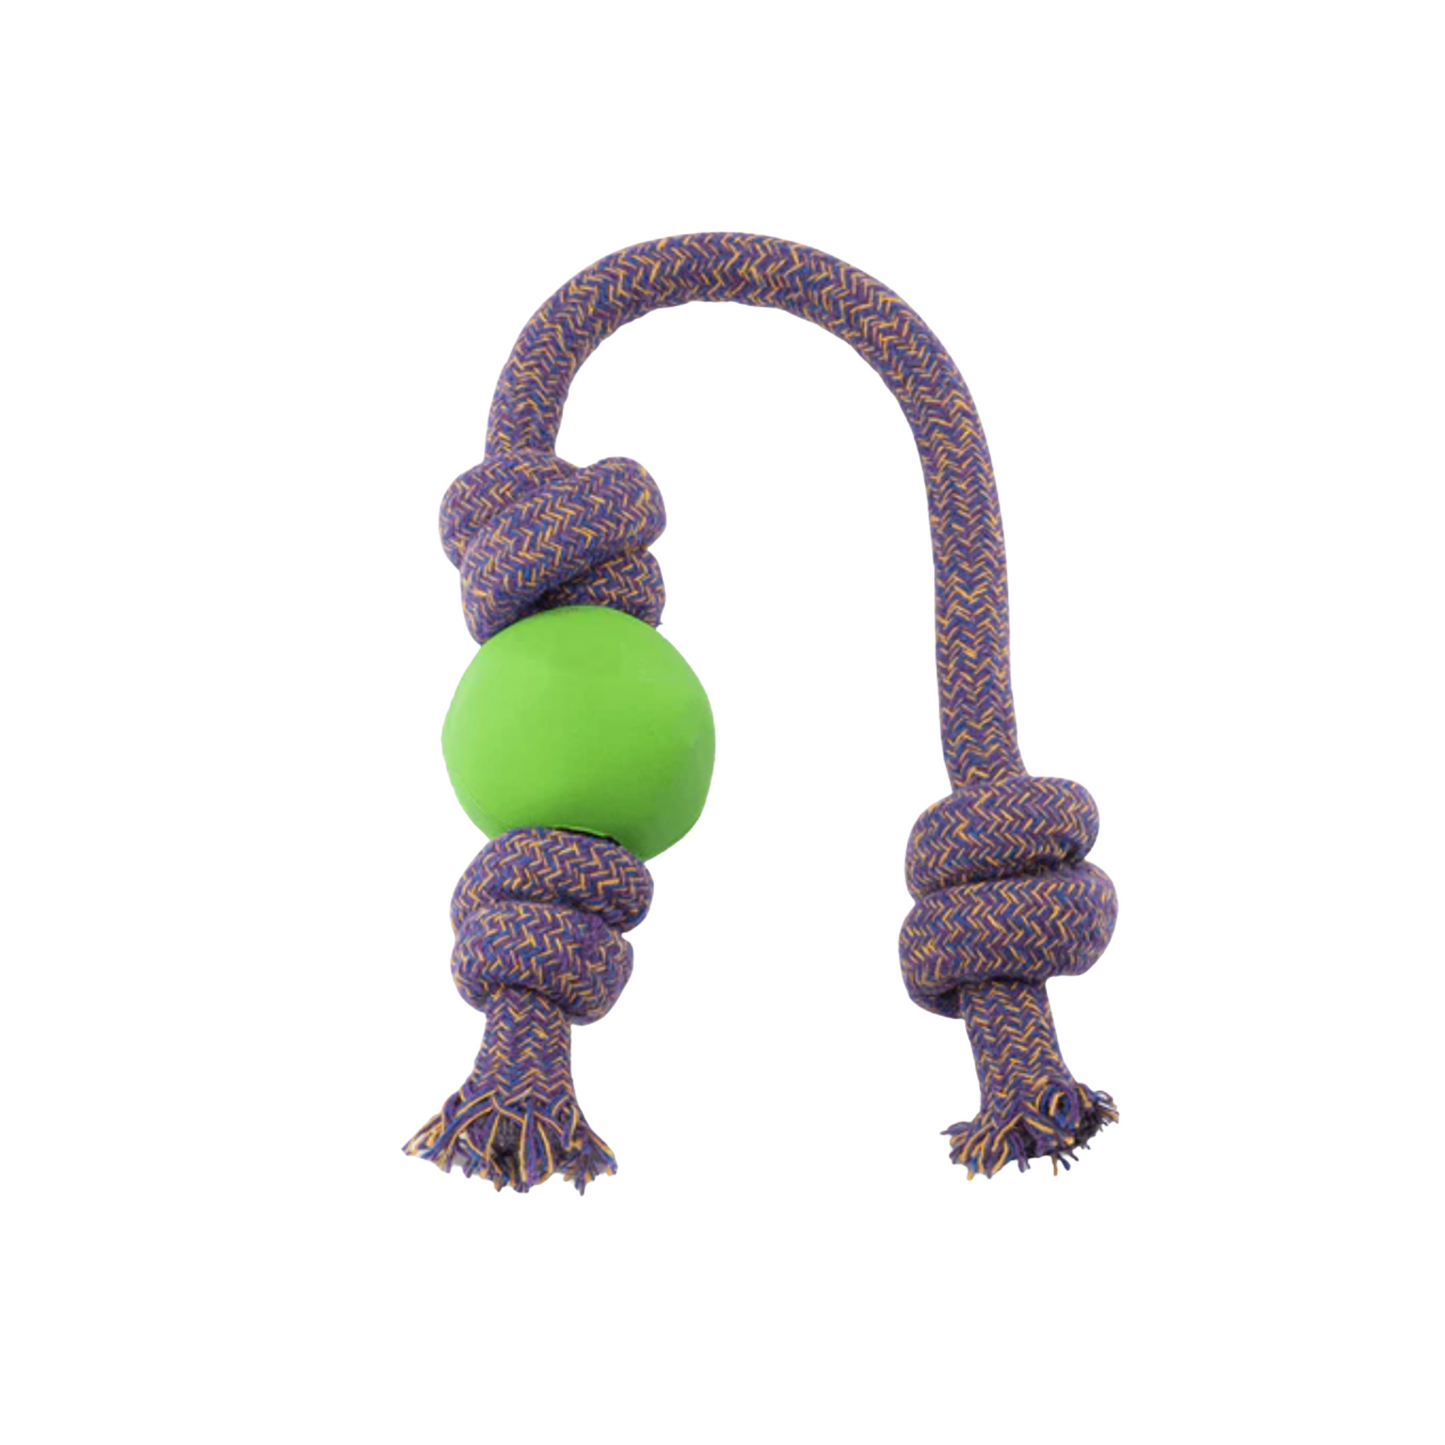 Beco Natural Rubber Ball on Rope Tug Toy Small & Large Blue, Pink, Green